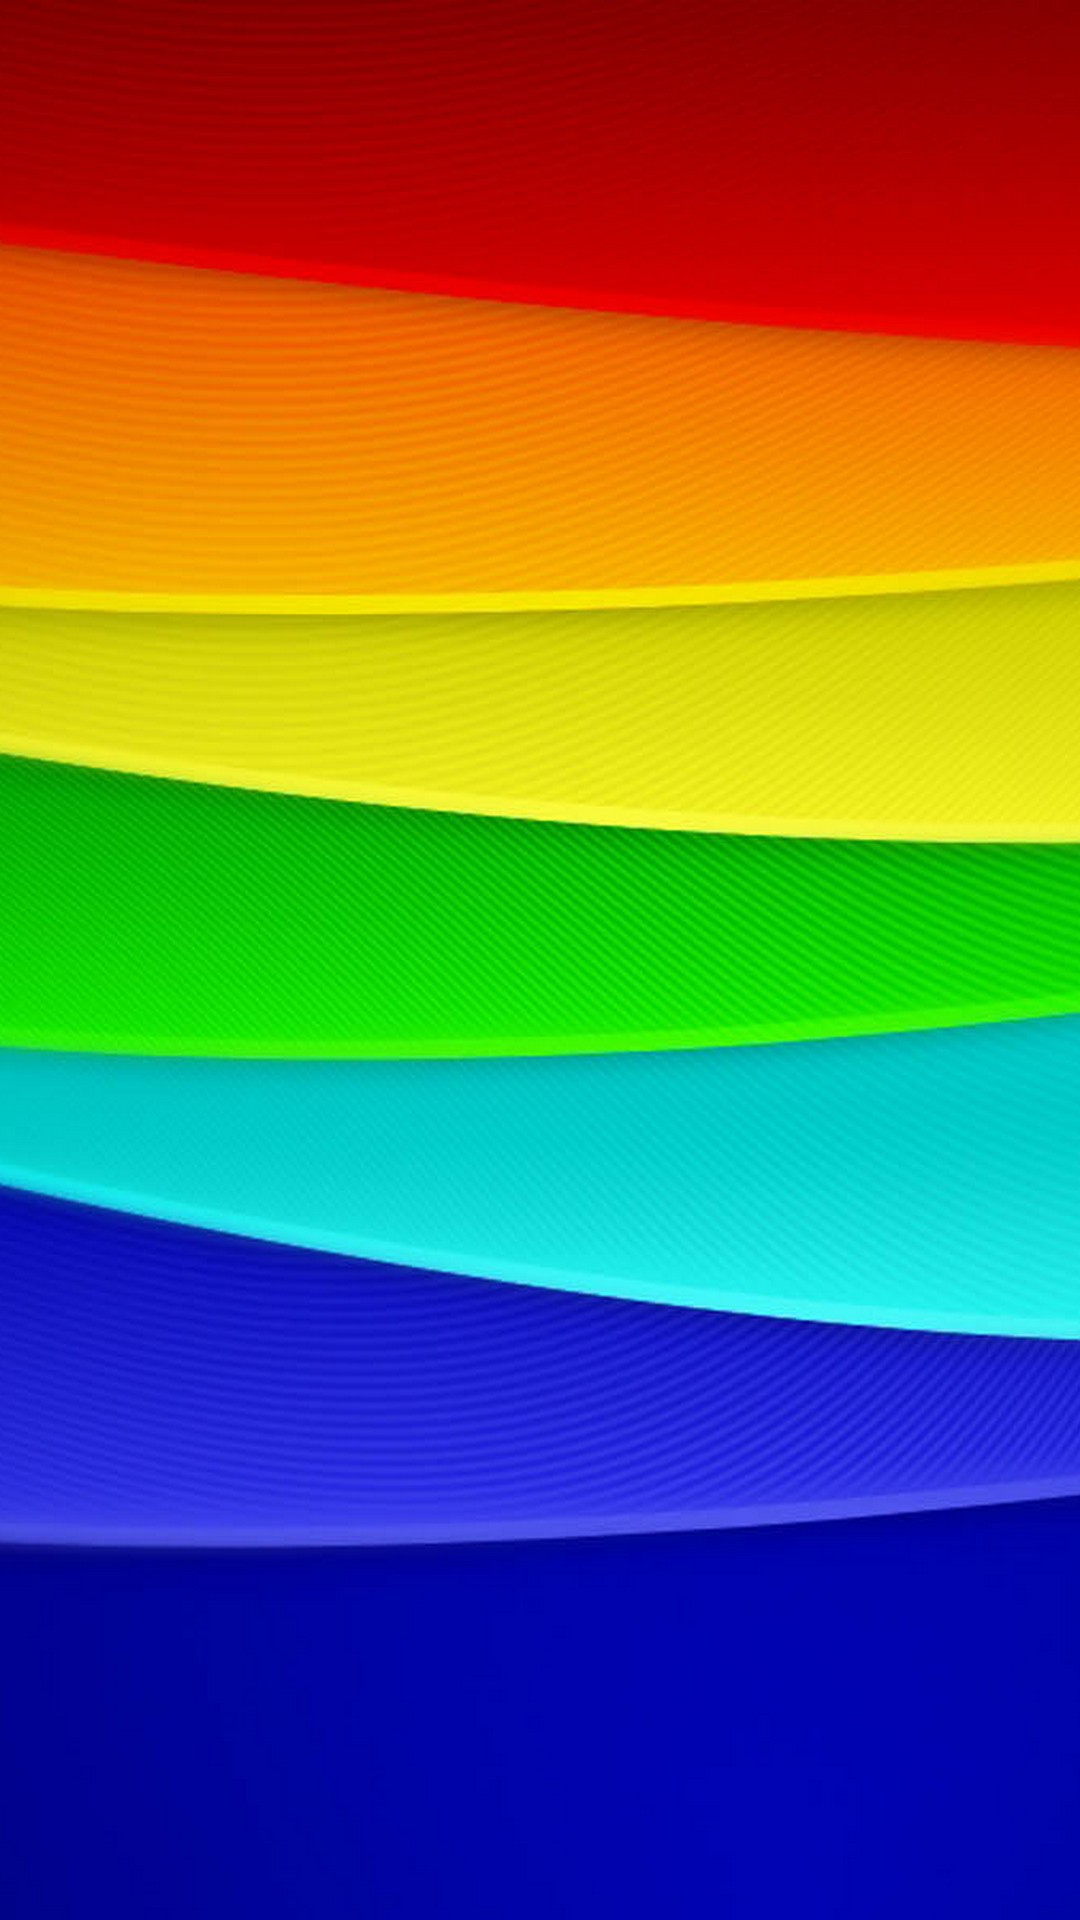 Rainbow Wallpaper iPhone with resolution 1080X1920 pixel. You can make this wallpaper for your iPhone 5, 6, 7, 8, X backgrounds, Mobile Screensaver, or iPad Lock Screen